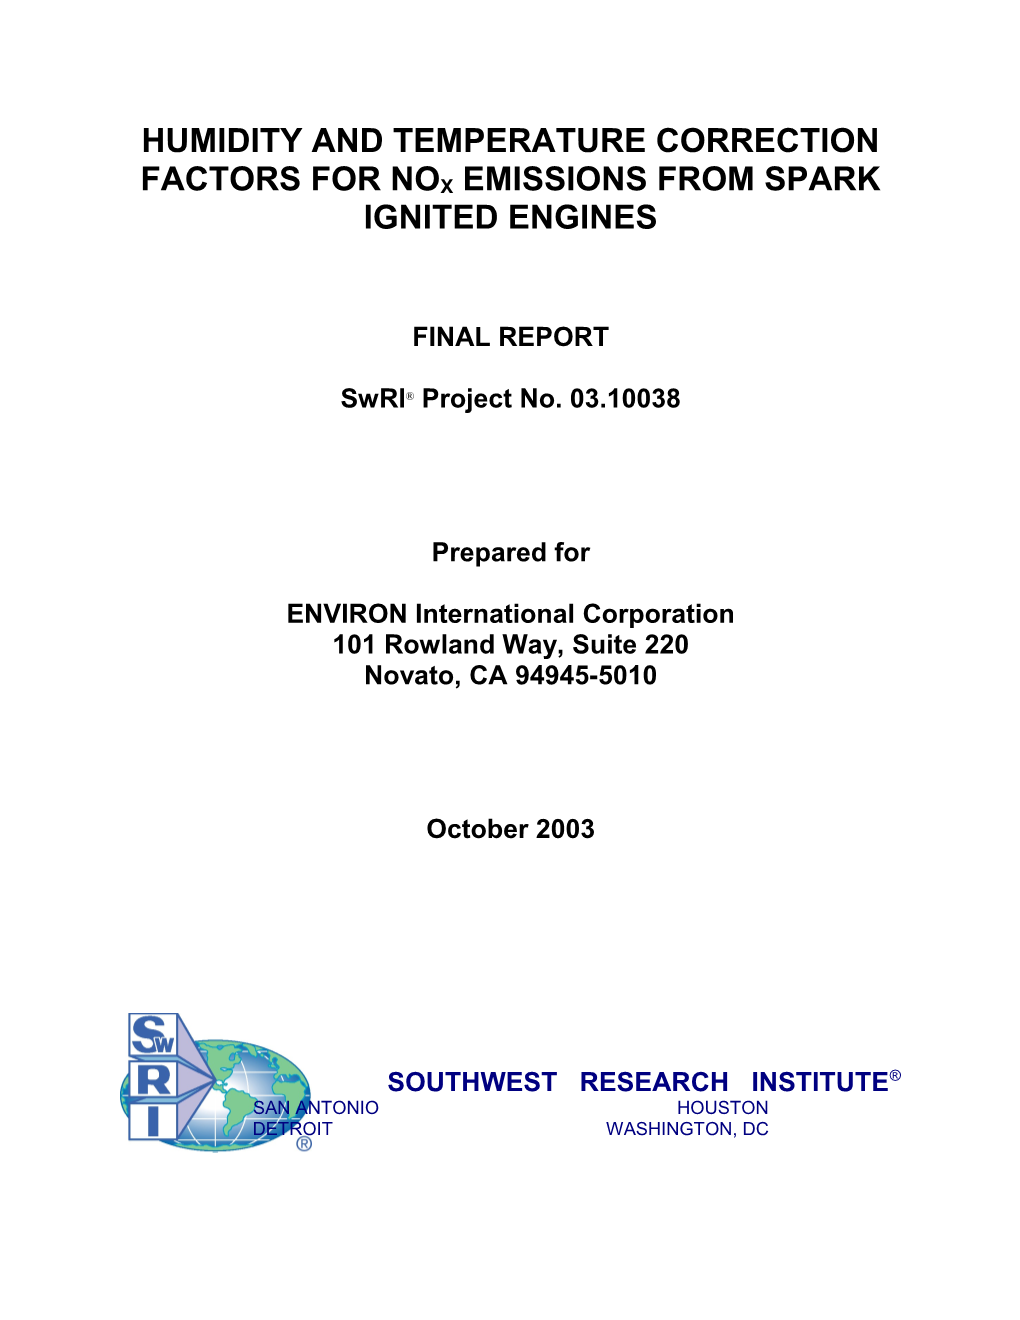 Humidity and Temperature Correction Factors for Nox Emissions from Spark Ignited Engines